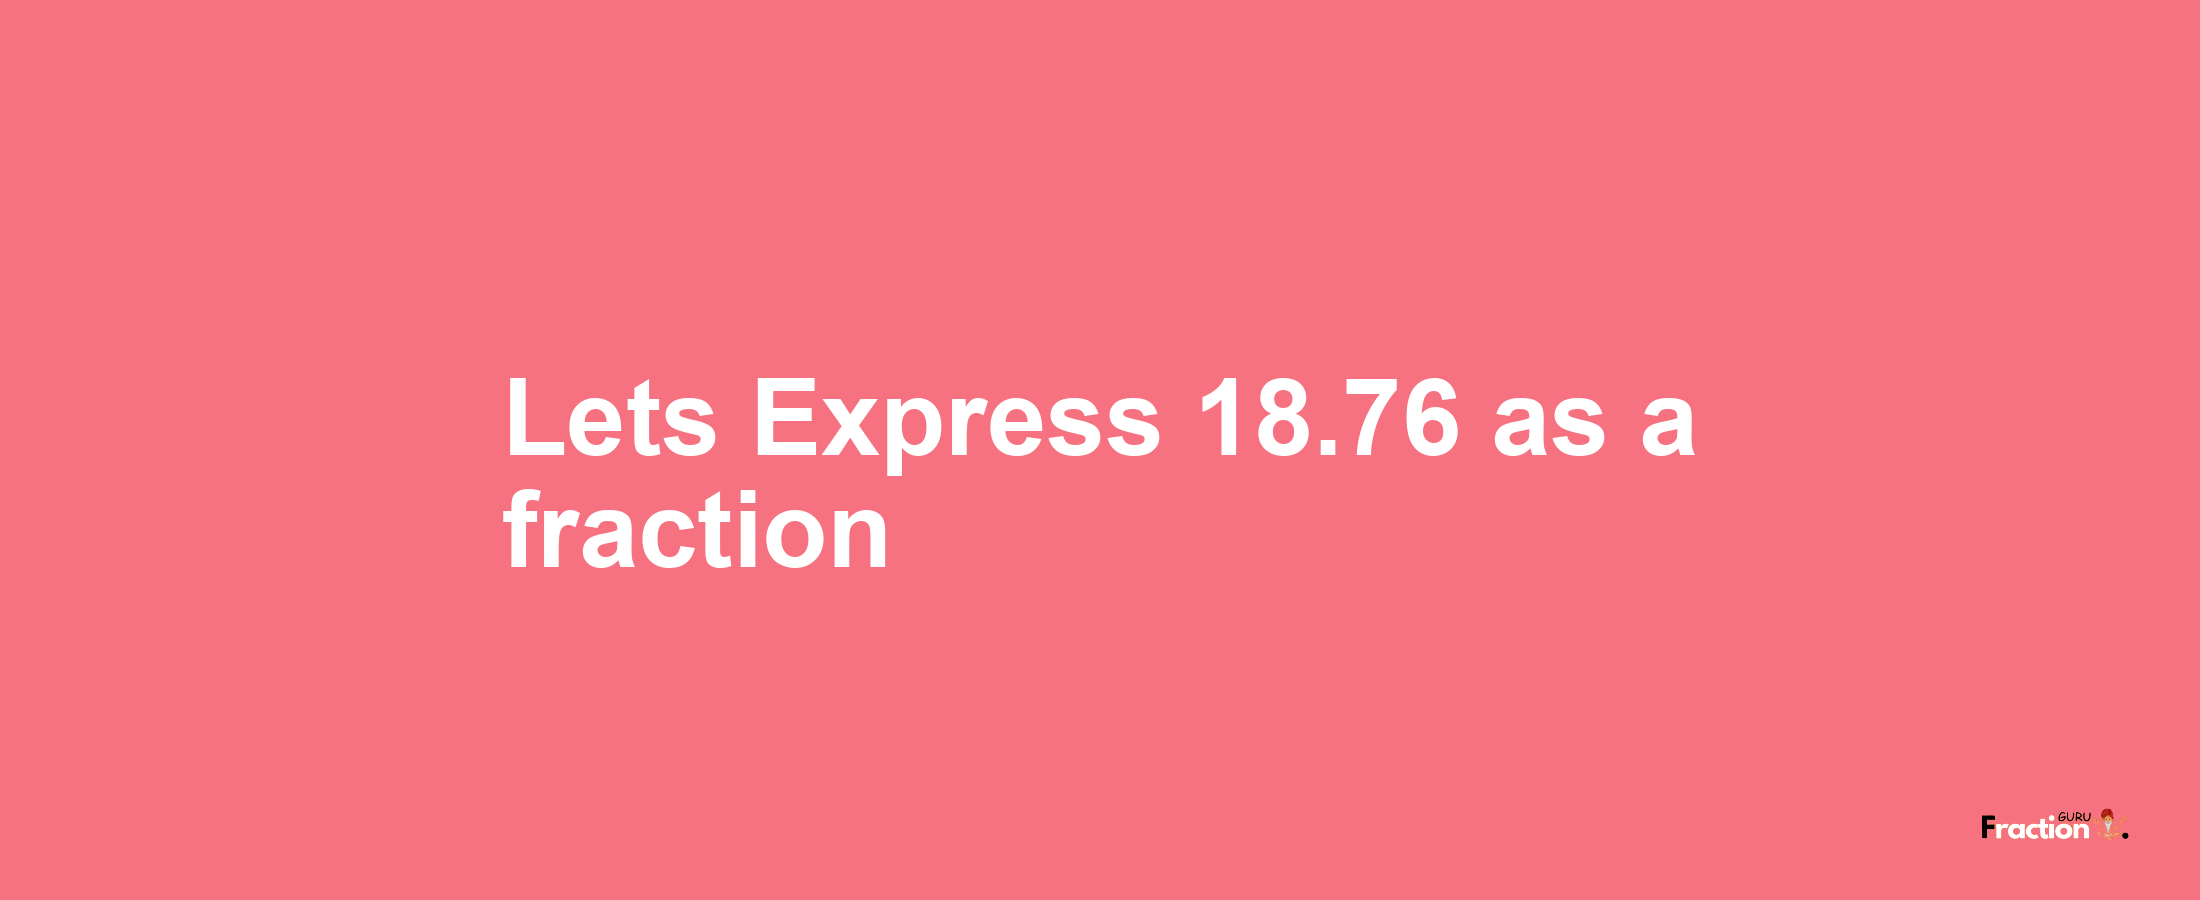 Lets Express 18.76 as afraction